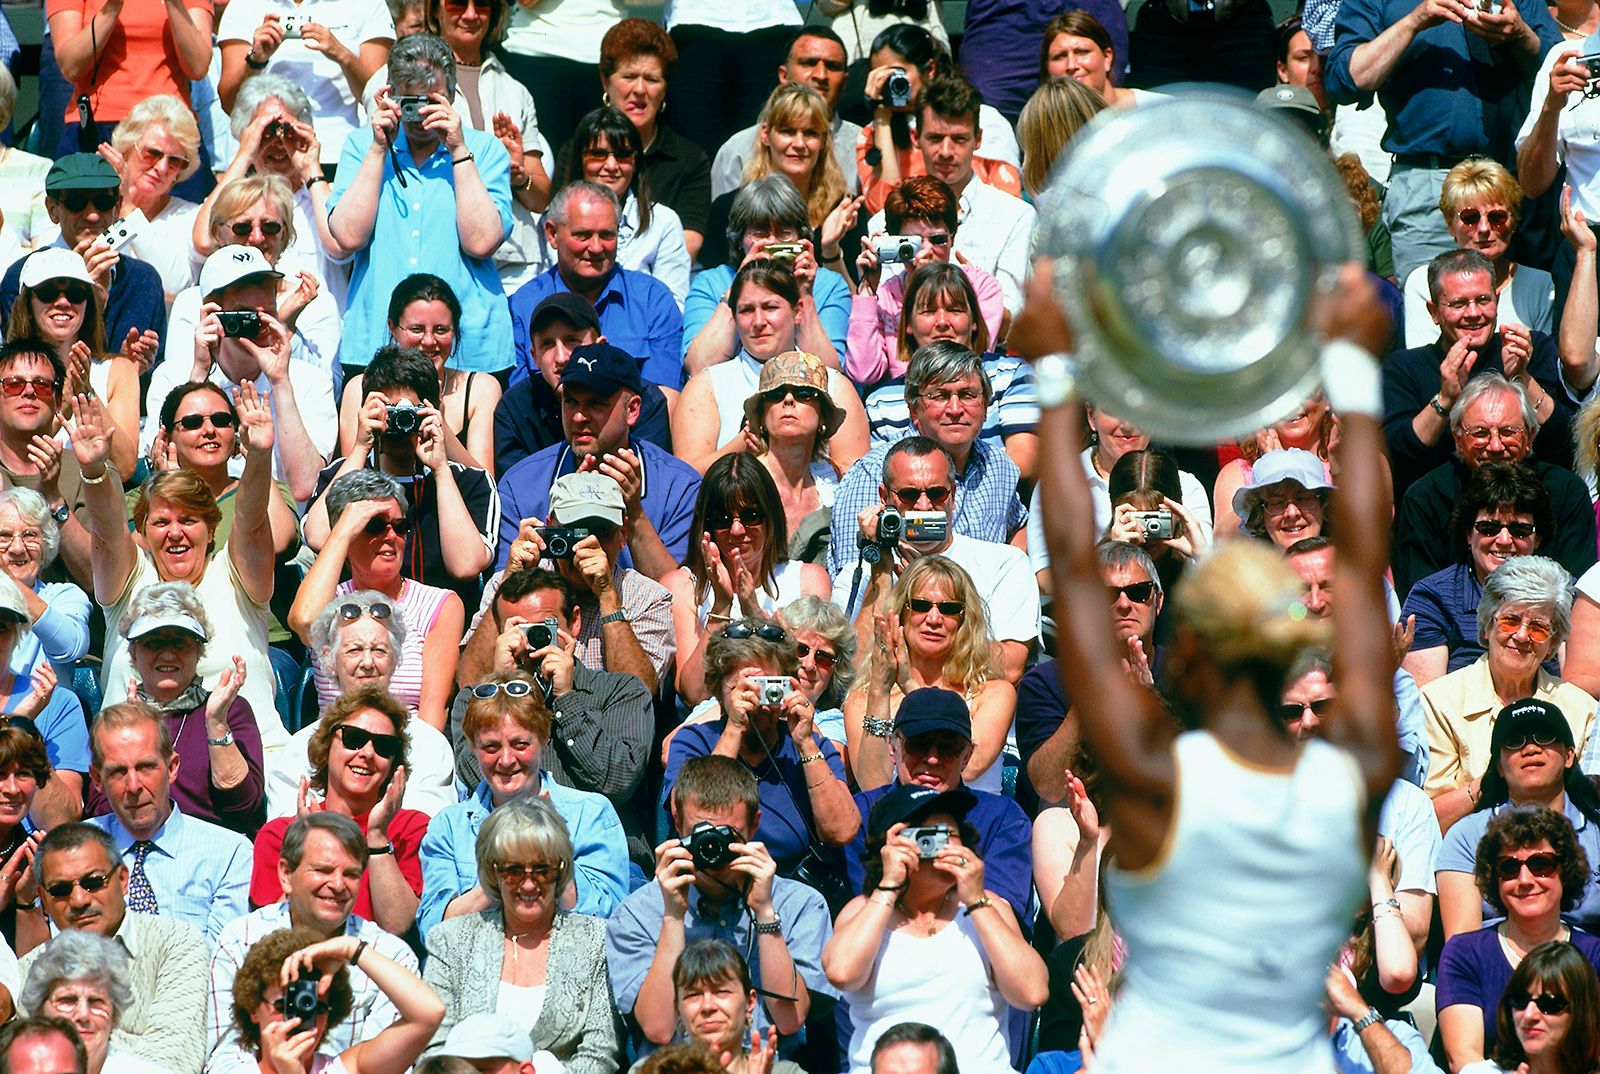 Serena Williams poses with the trophy after winning her first Wimbledon title in 2002. She was No. 1 in the world at the age of 20.